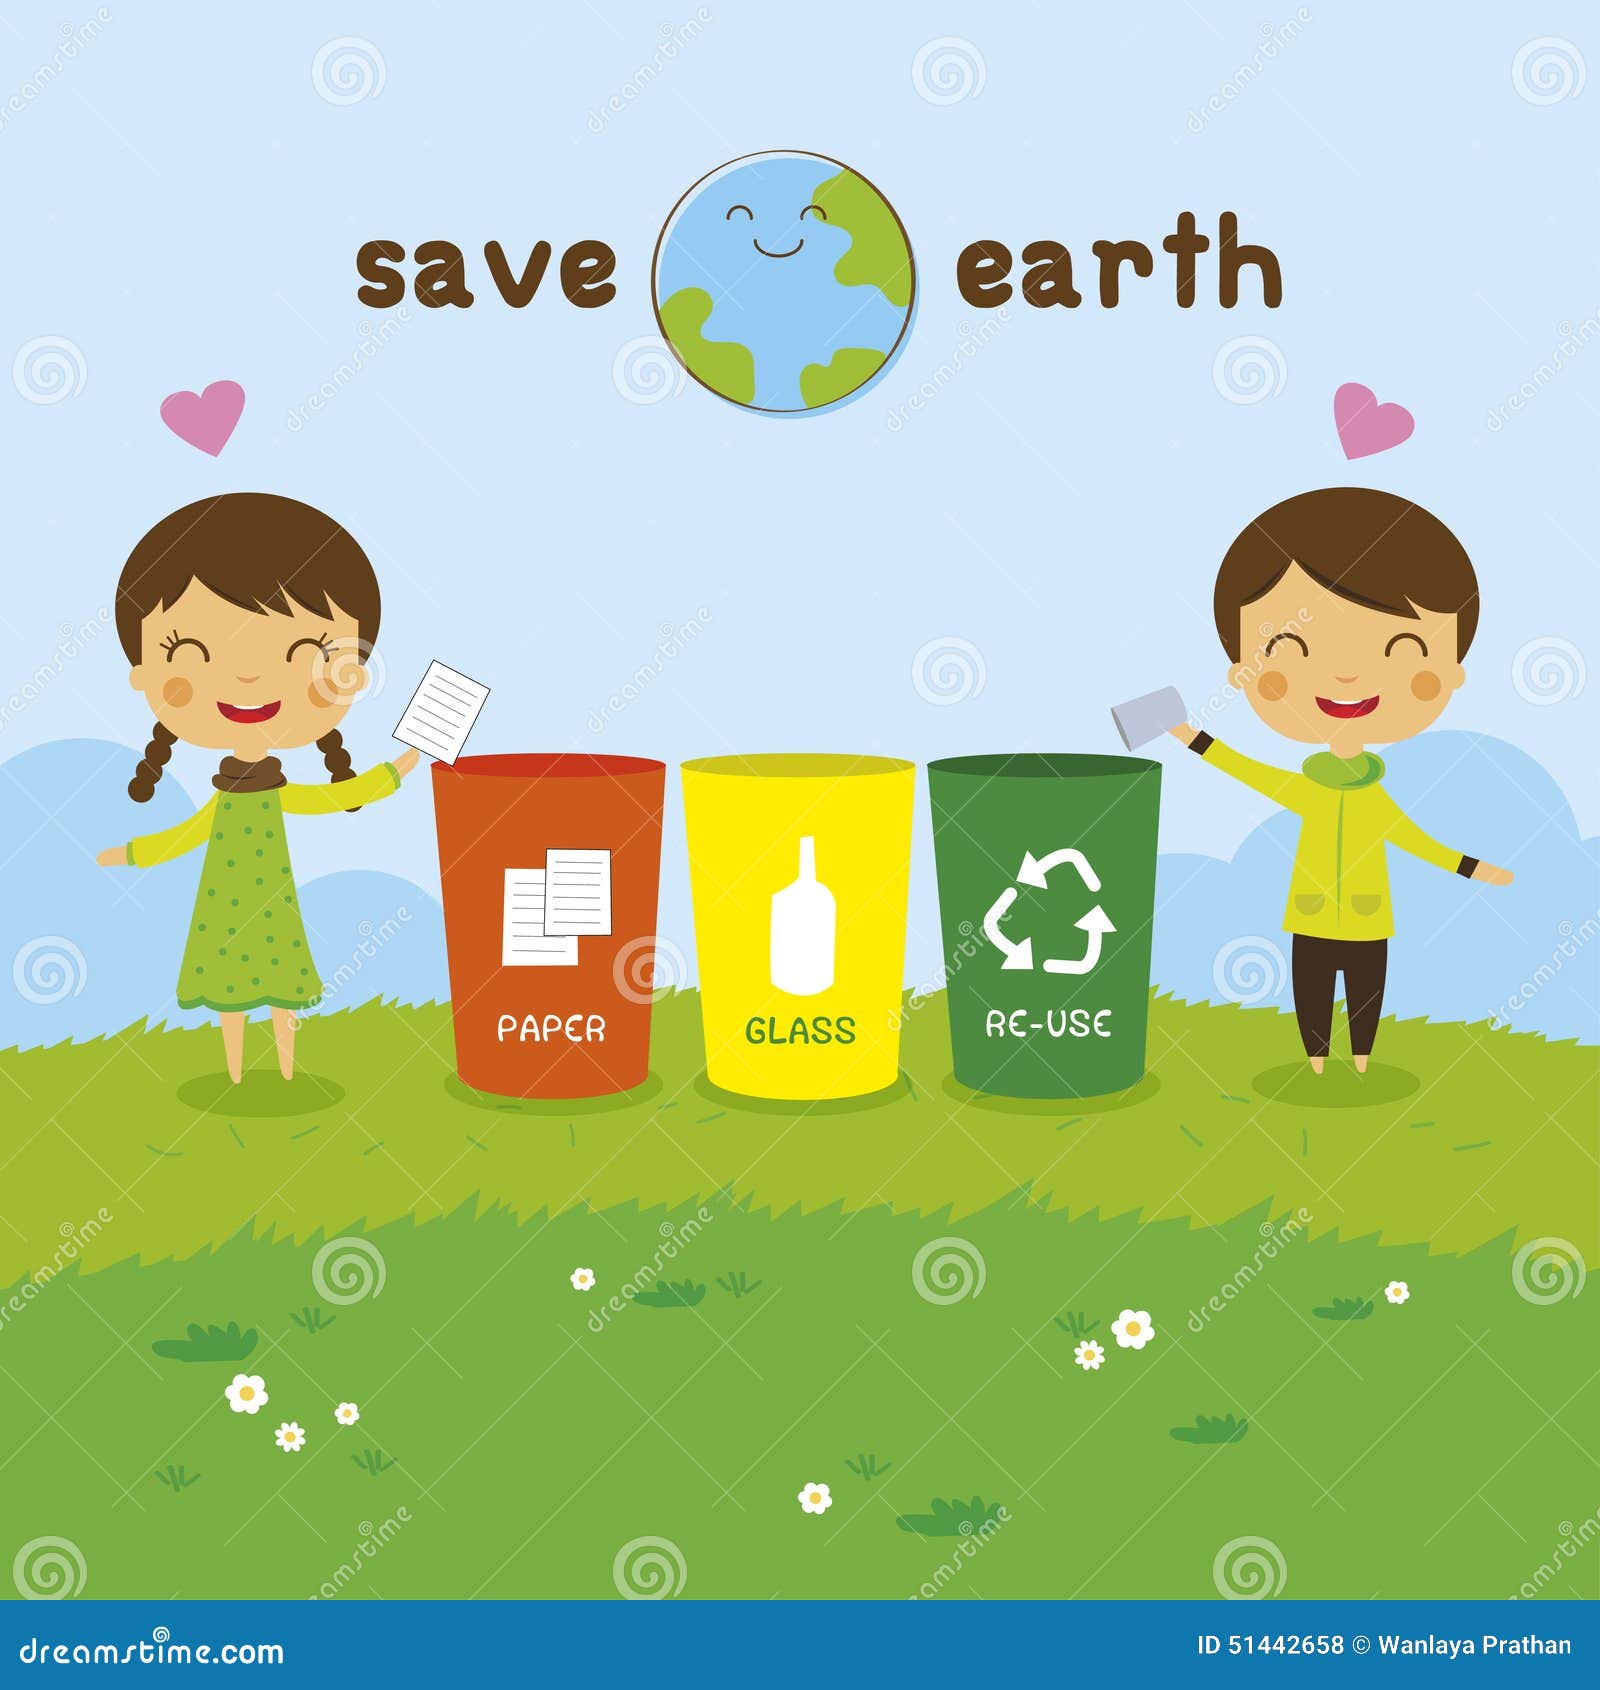 clipart on save environment - photo #50